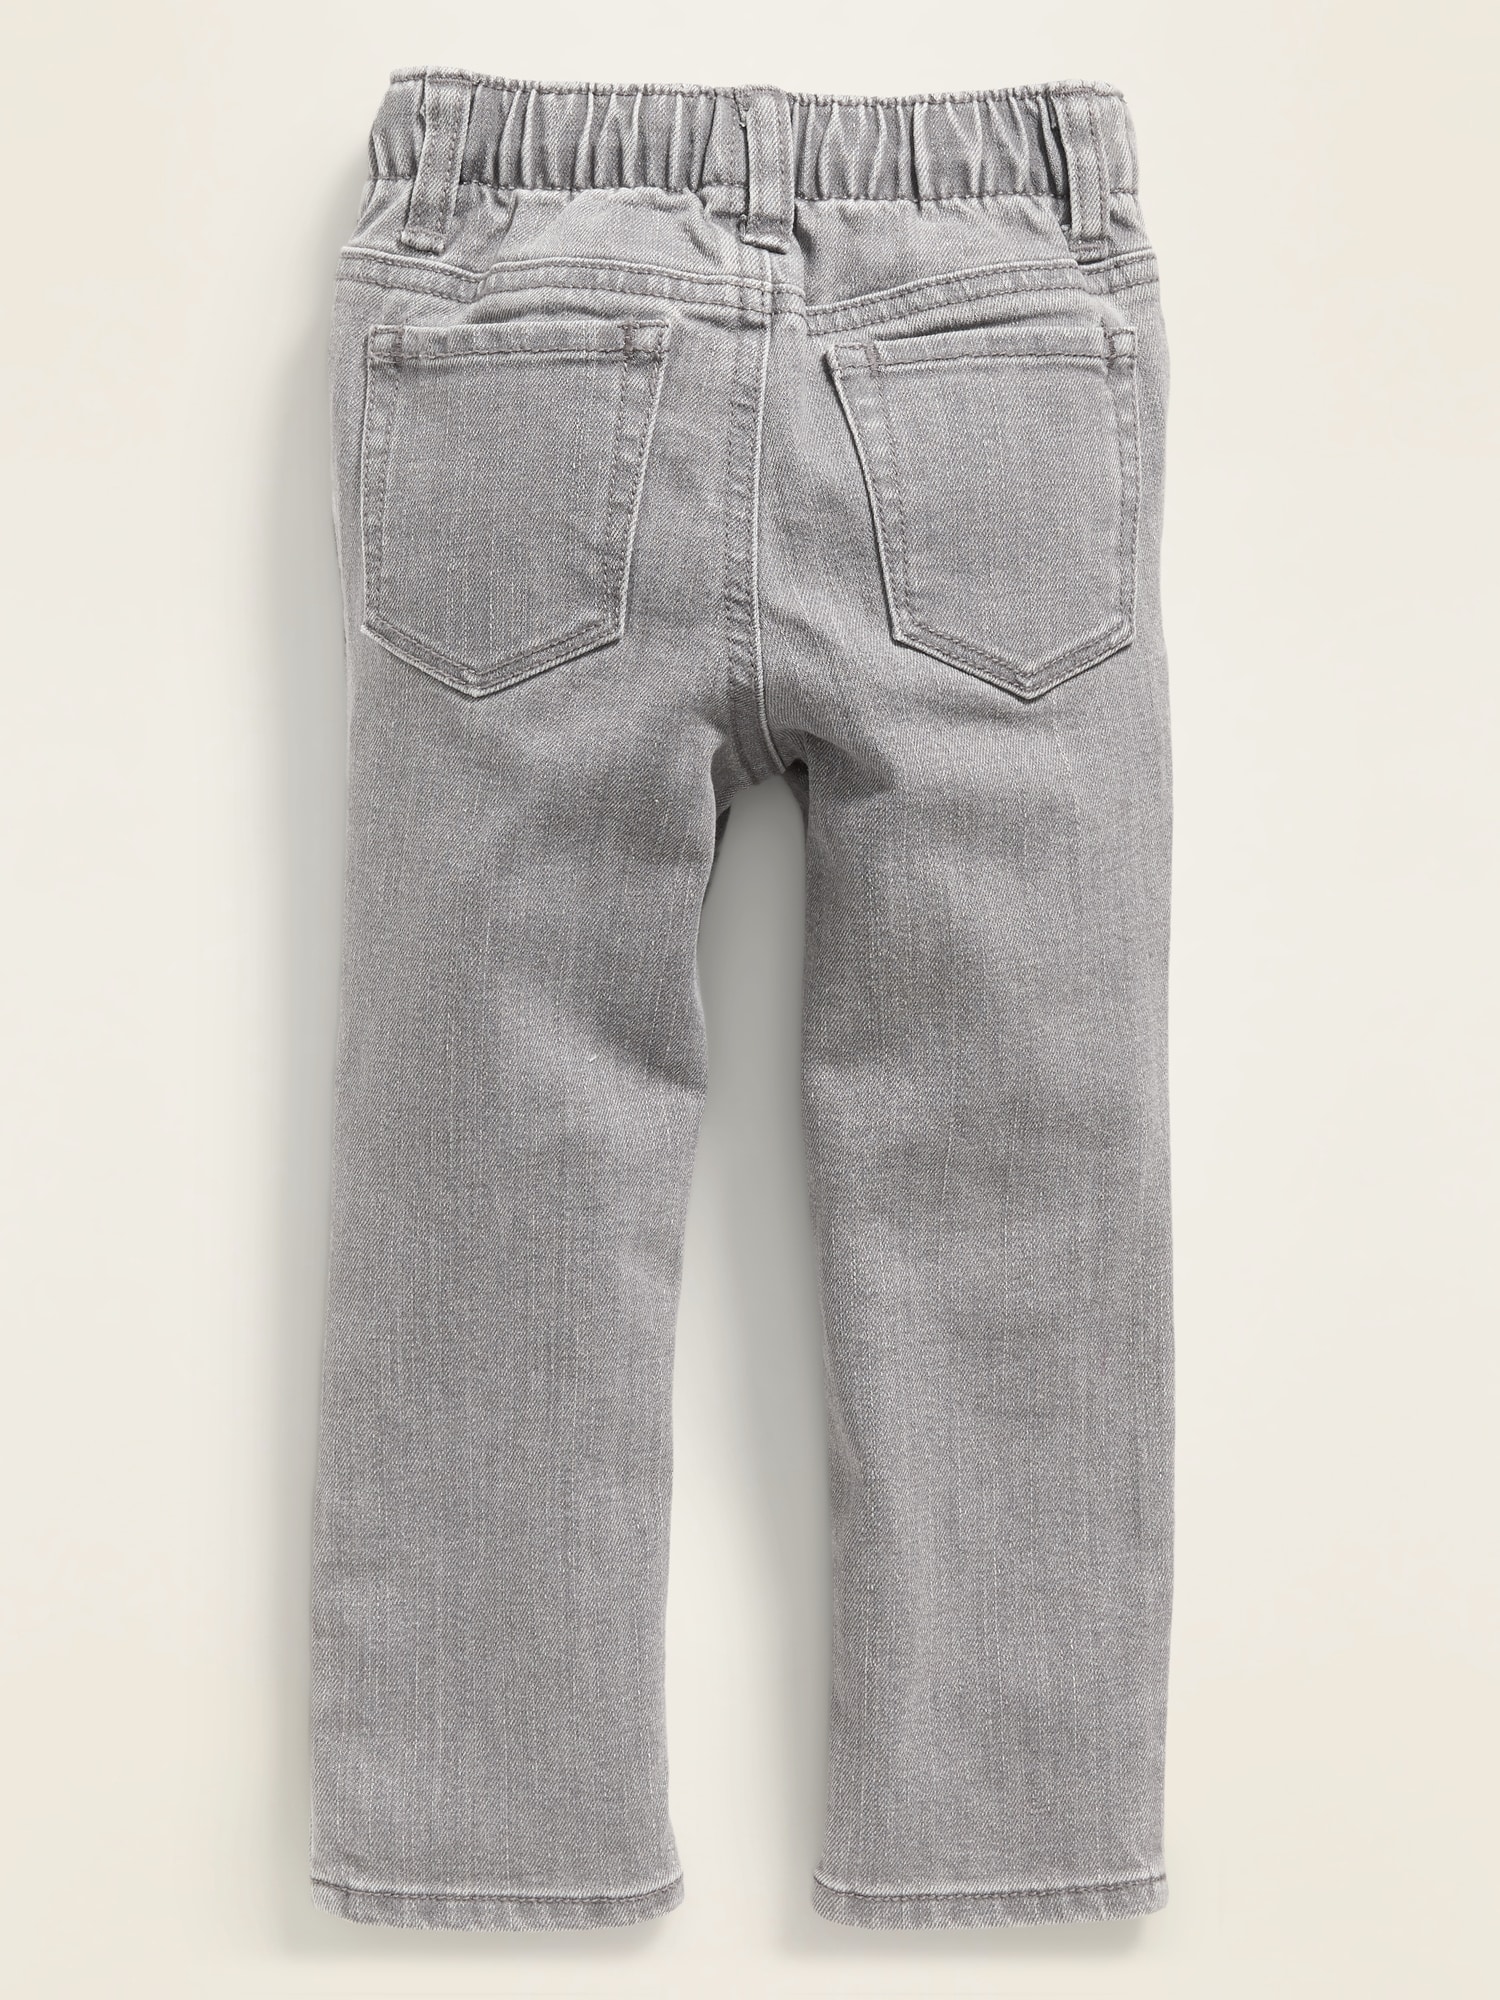 grey jeans old navy